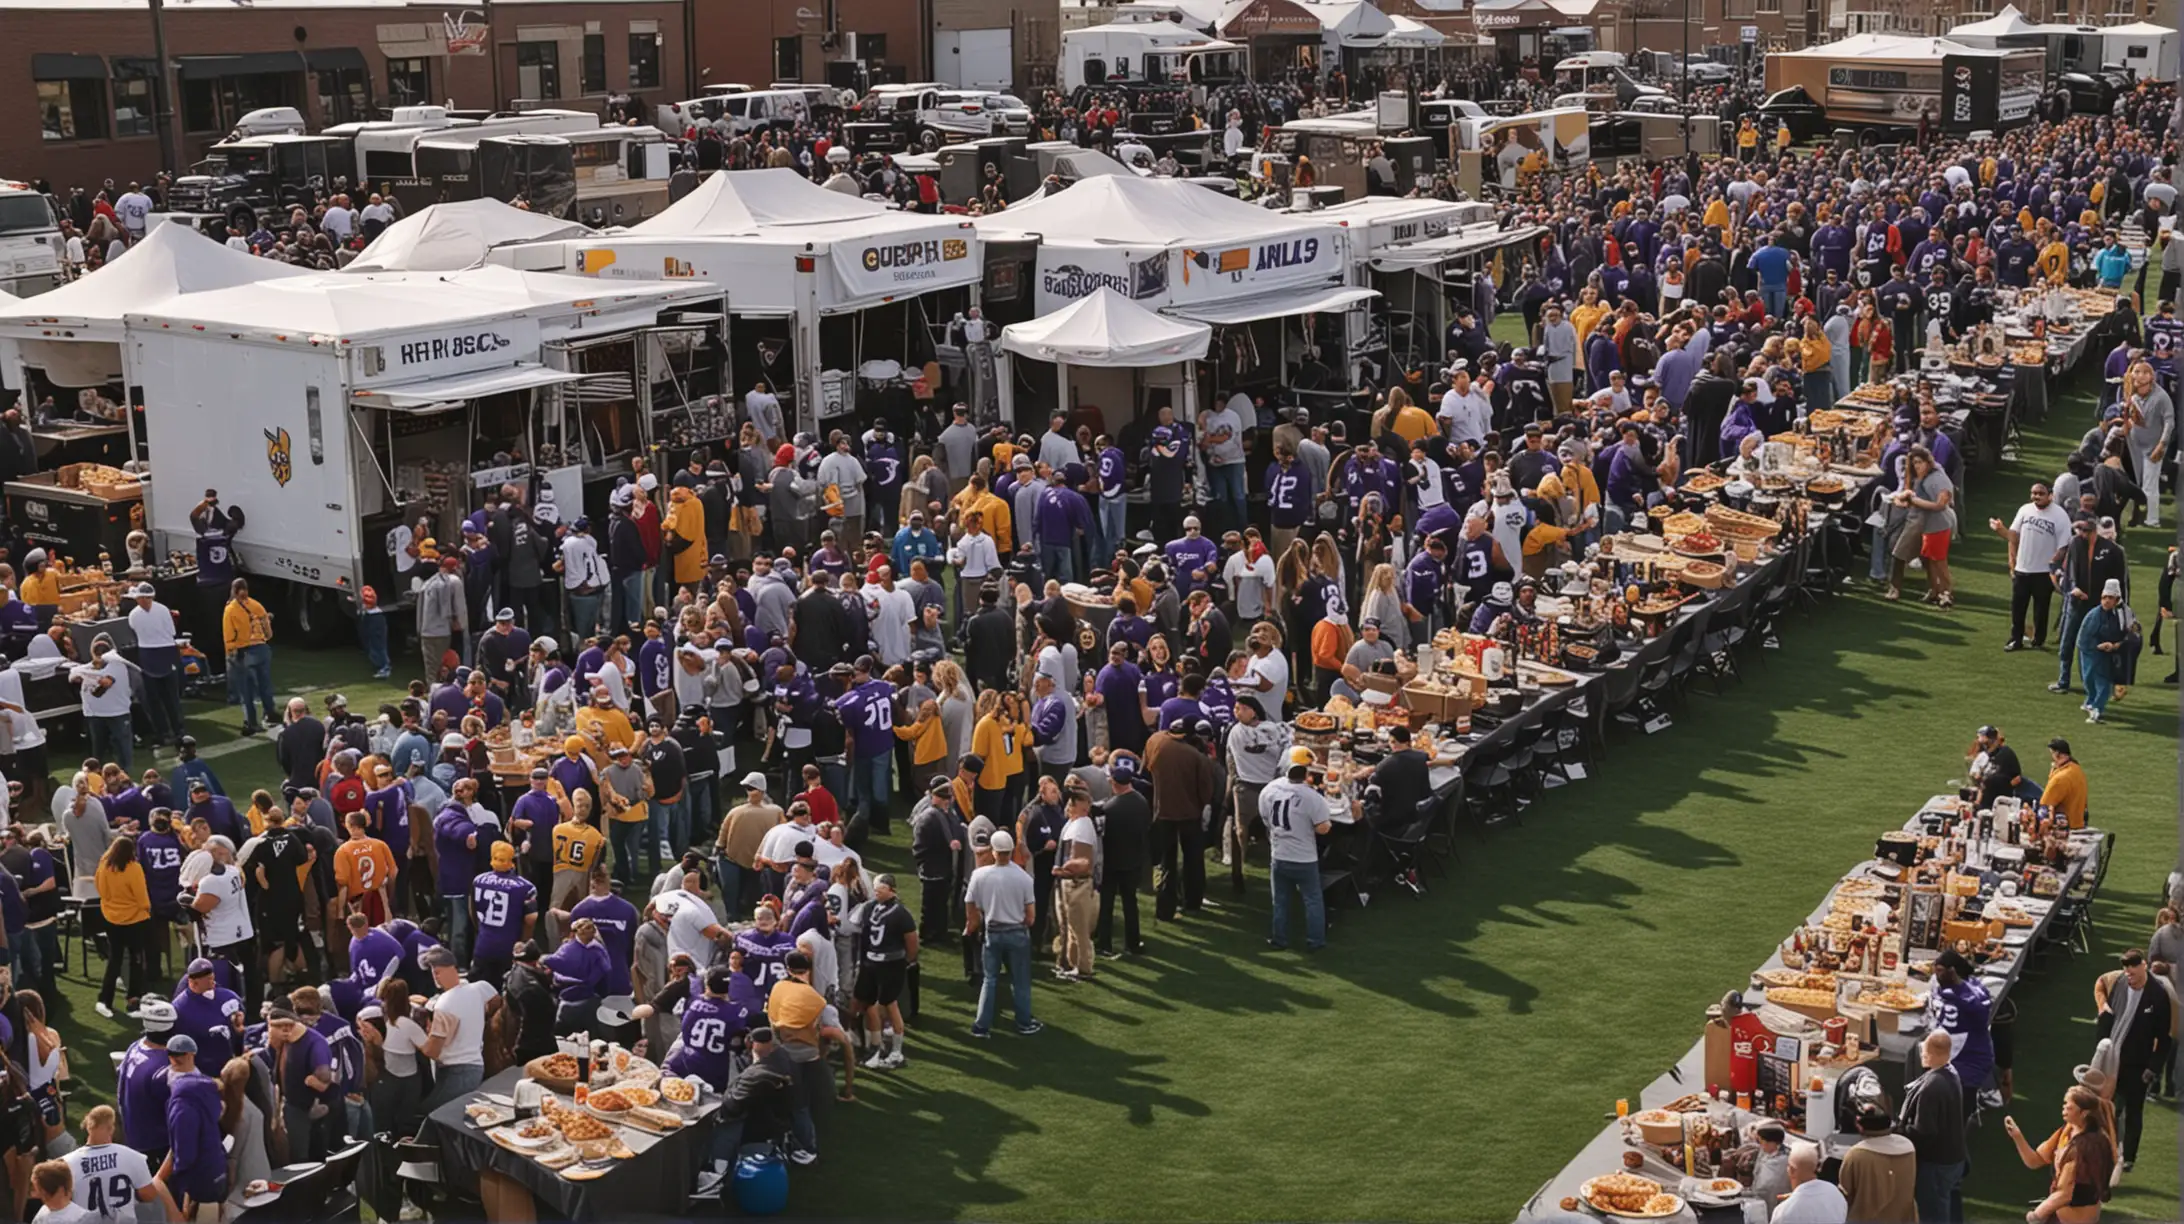 NFL Tailgate Party that's cinematic, NFL Vikings, Lots of food and drinks on tables and the tailgate of a pic-up truck.

